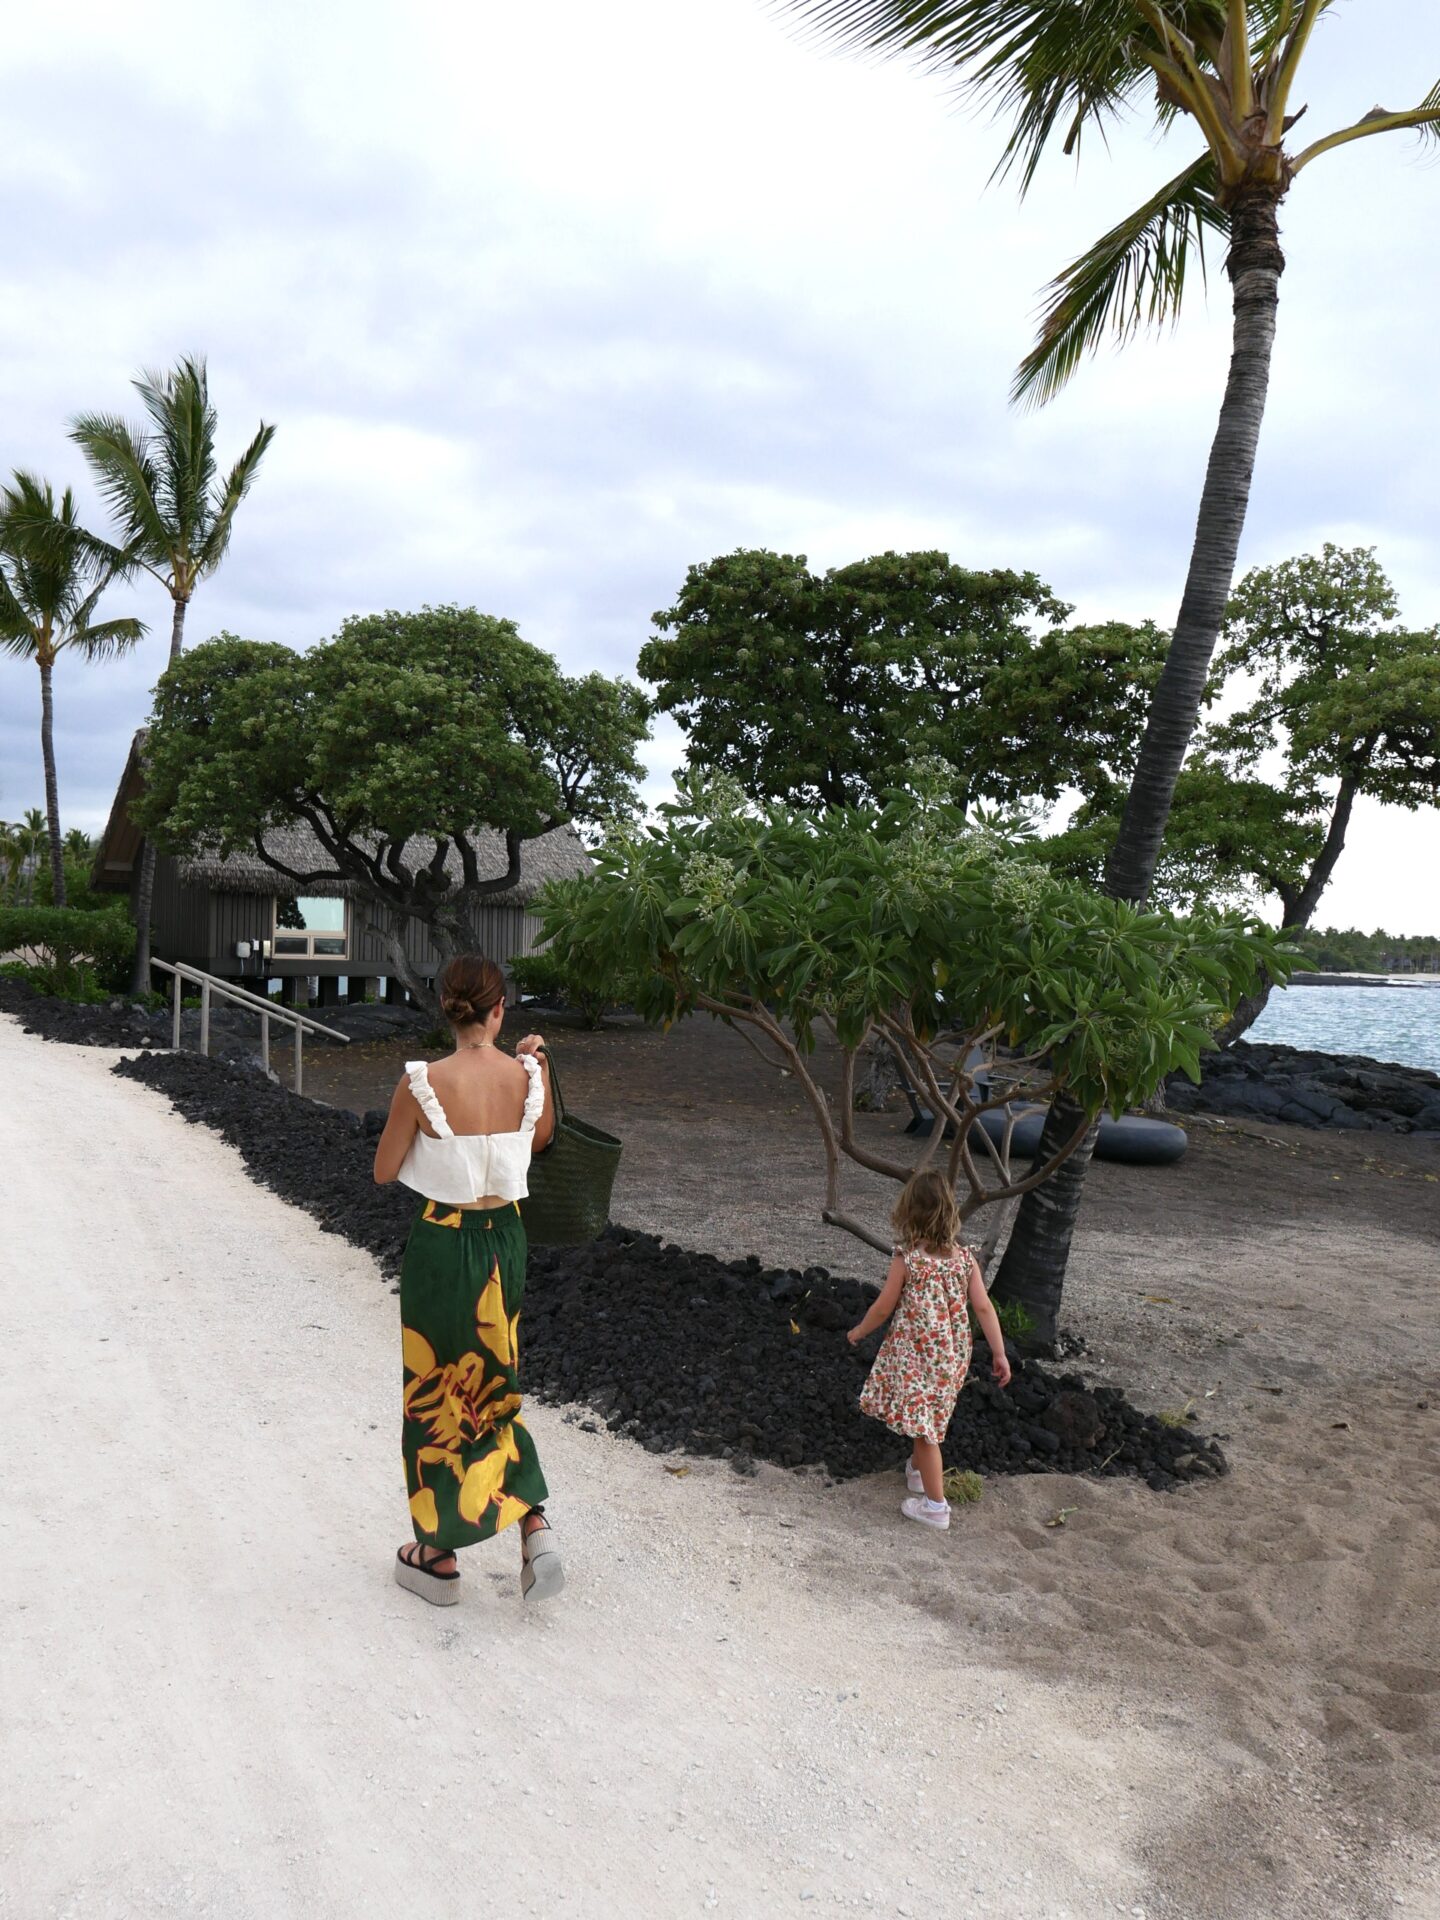 Alicia Lund with her child walking at the shore of Kona Village